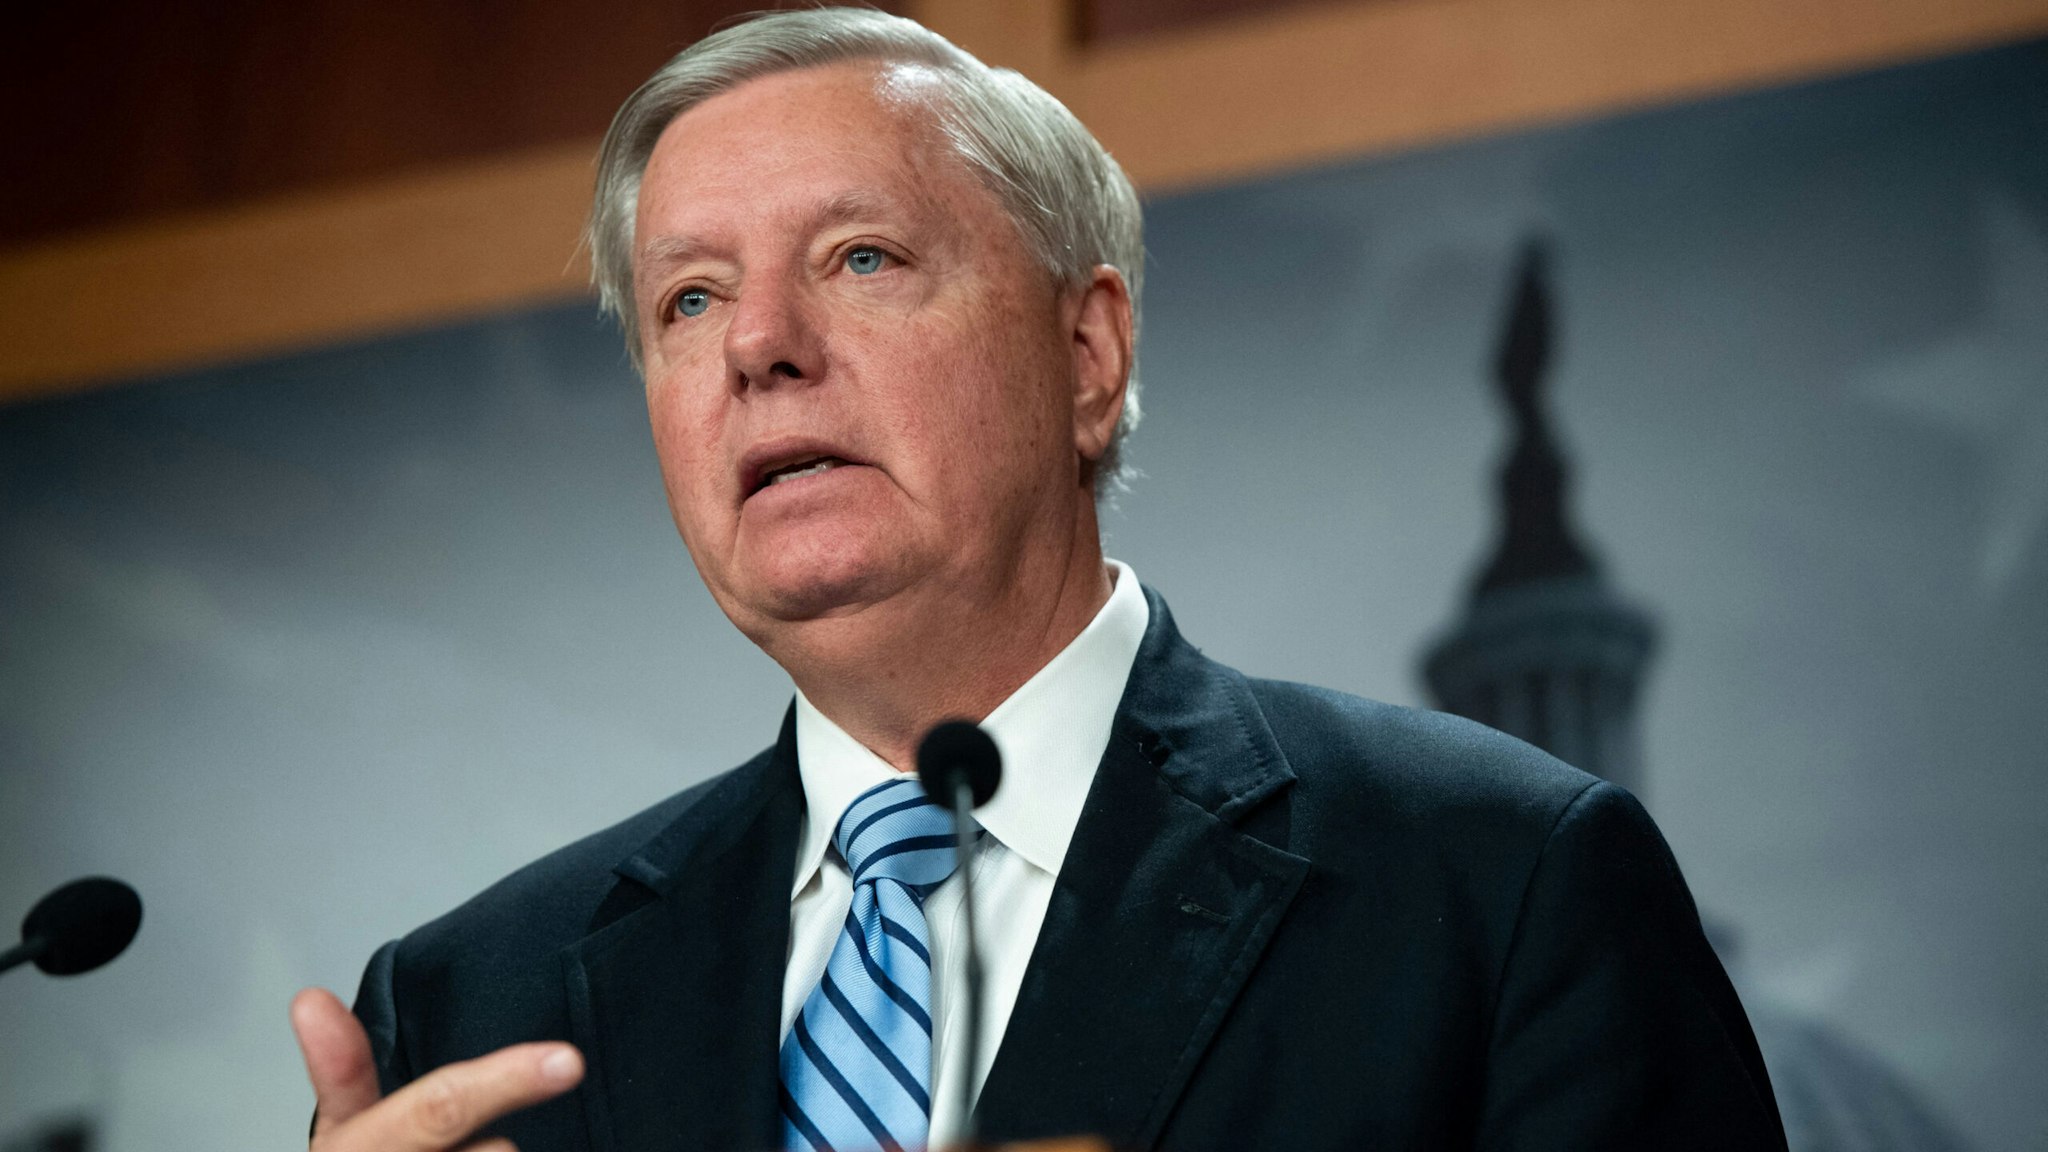 US Senator Lindsey Graham, Republican of South Carolina, speaks during a press conference as they voice their opposition ahead of a vote on the confirmation of Judge Ketanji Brown Jackson as the first Black woman ever to serve on the Supreme Court, at the US Capitol in Washington, DC, April 7, 2022.